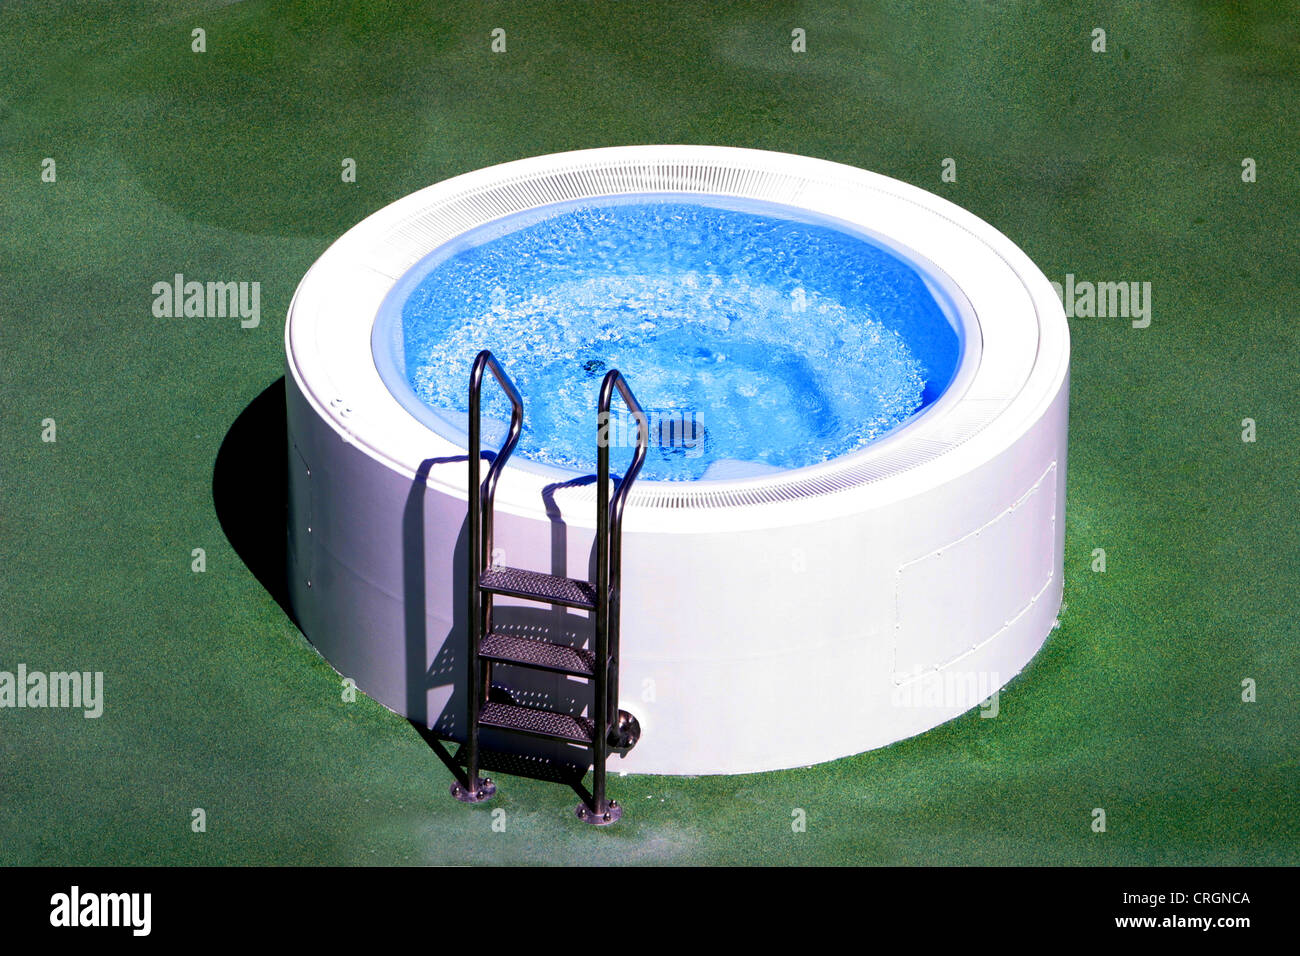 Whirlpool with ladder Stock Photo